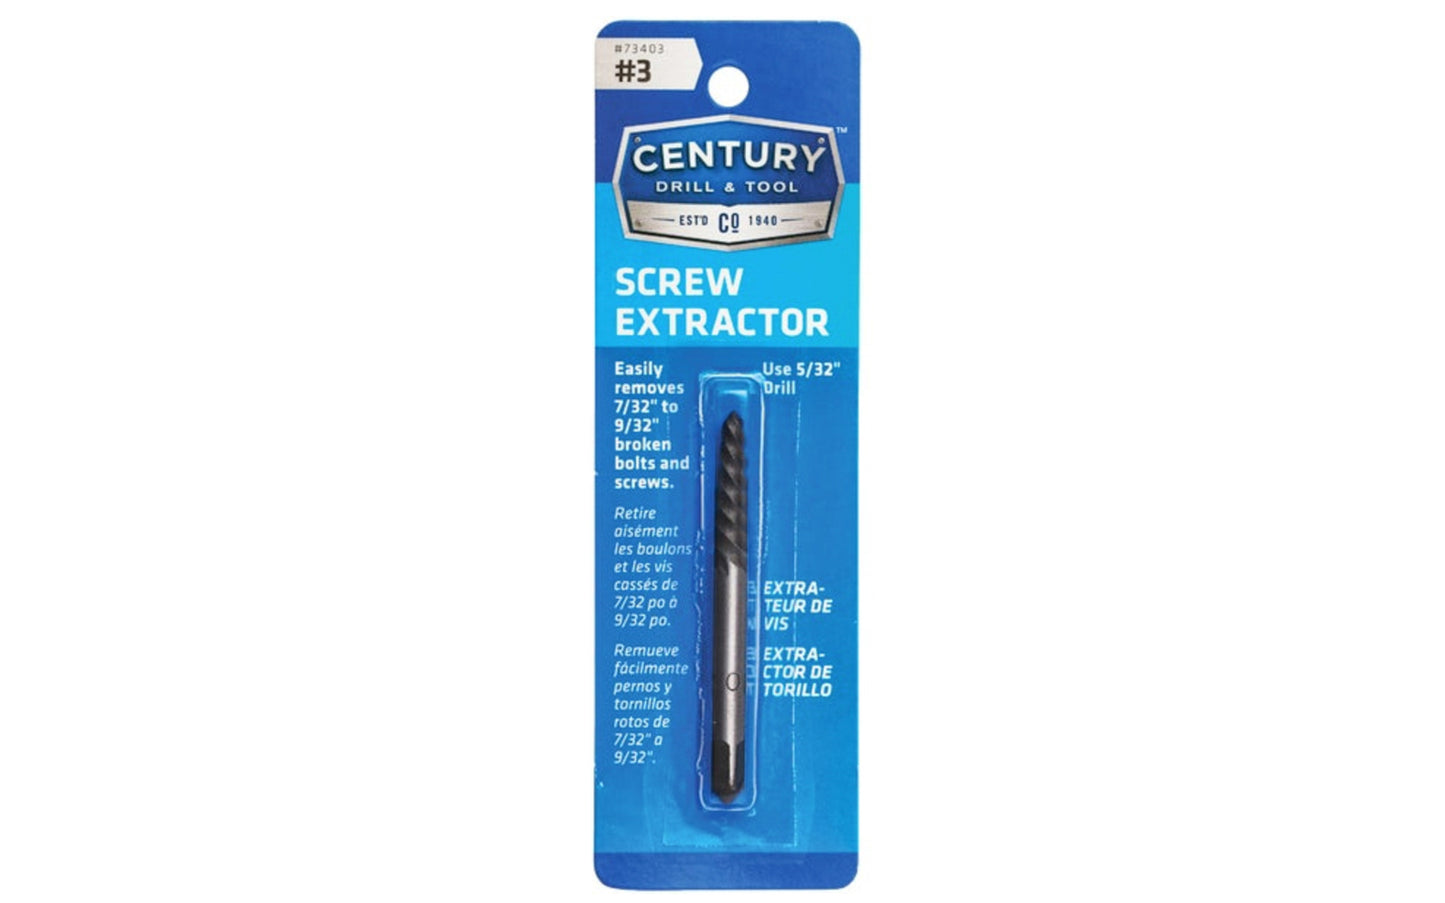 A Spiral Flute Screw Extractor made by Century Drill & Tool. Remove broken bolts & screws with these square shaft extractors. Ideal for thin wall extractions. #3 size.